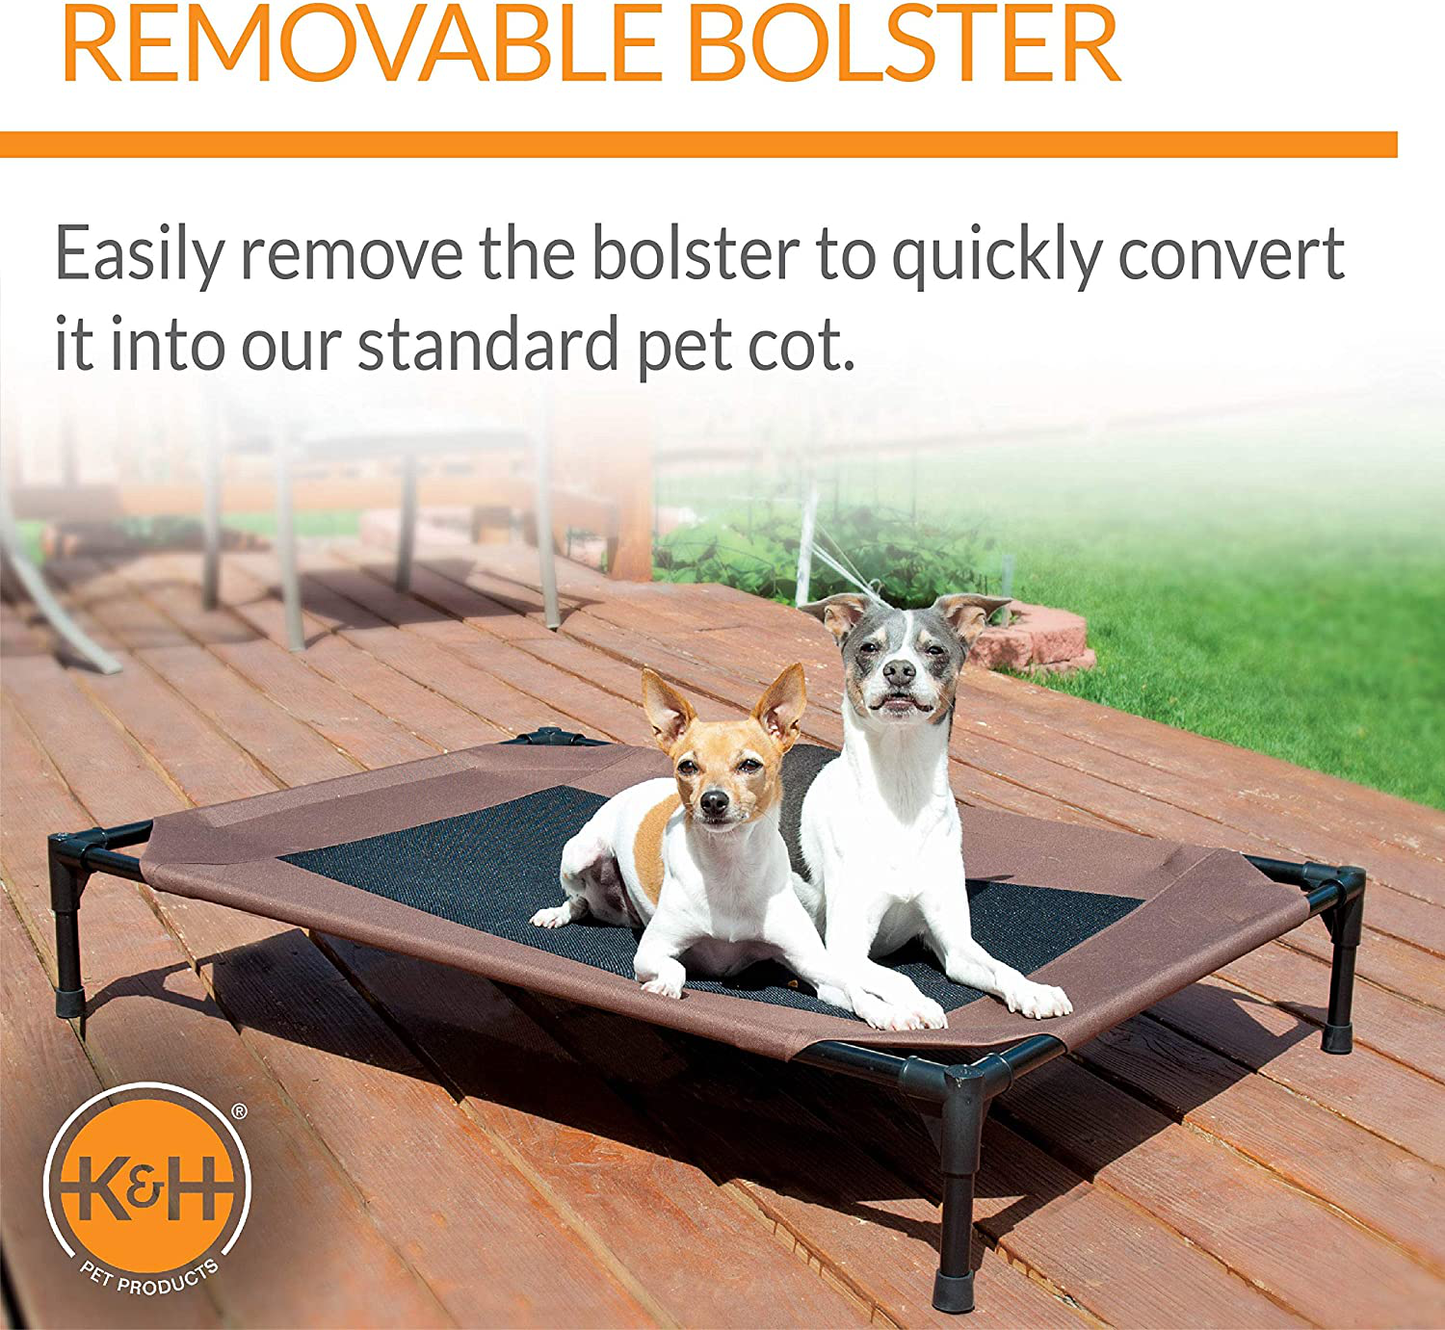 K&H Pet Products Original Bolster Pet Cot Outdoor Elevated Dog Bed with Removable Bolsters - Chocolate/Black Mesh